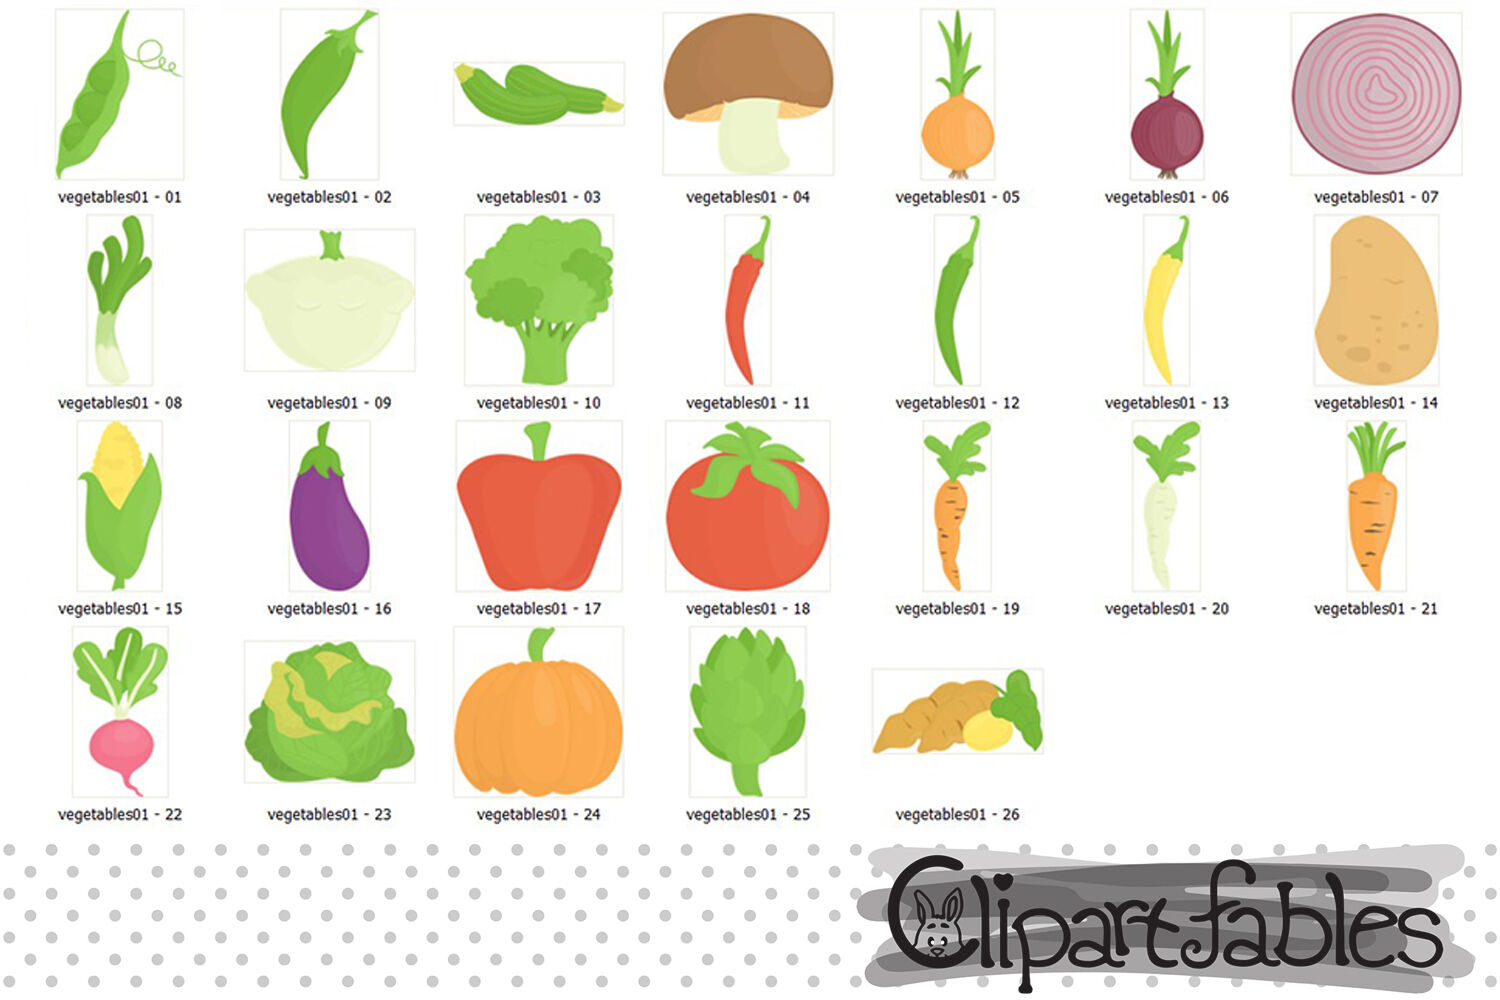 healthy food clipart images